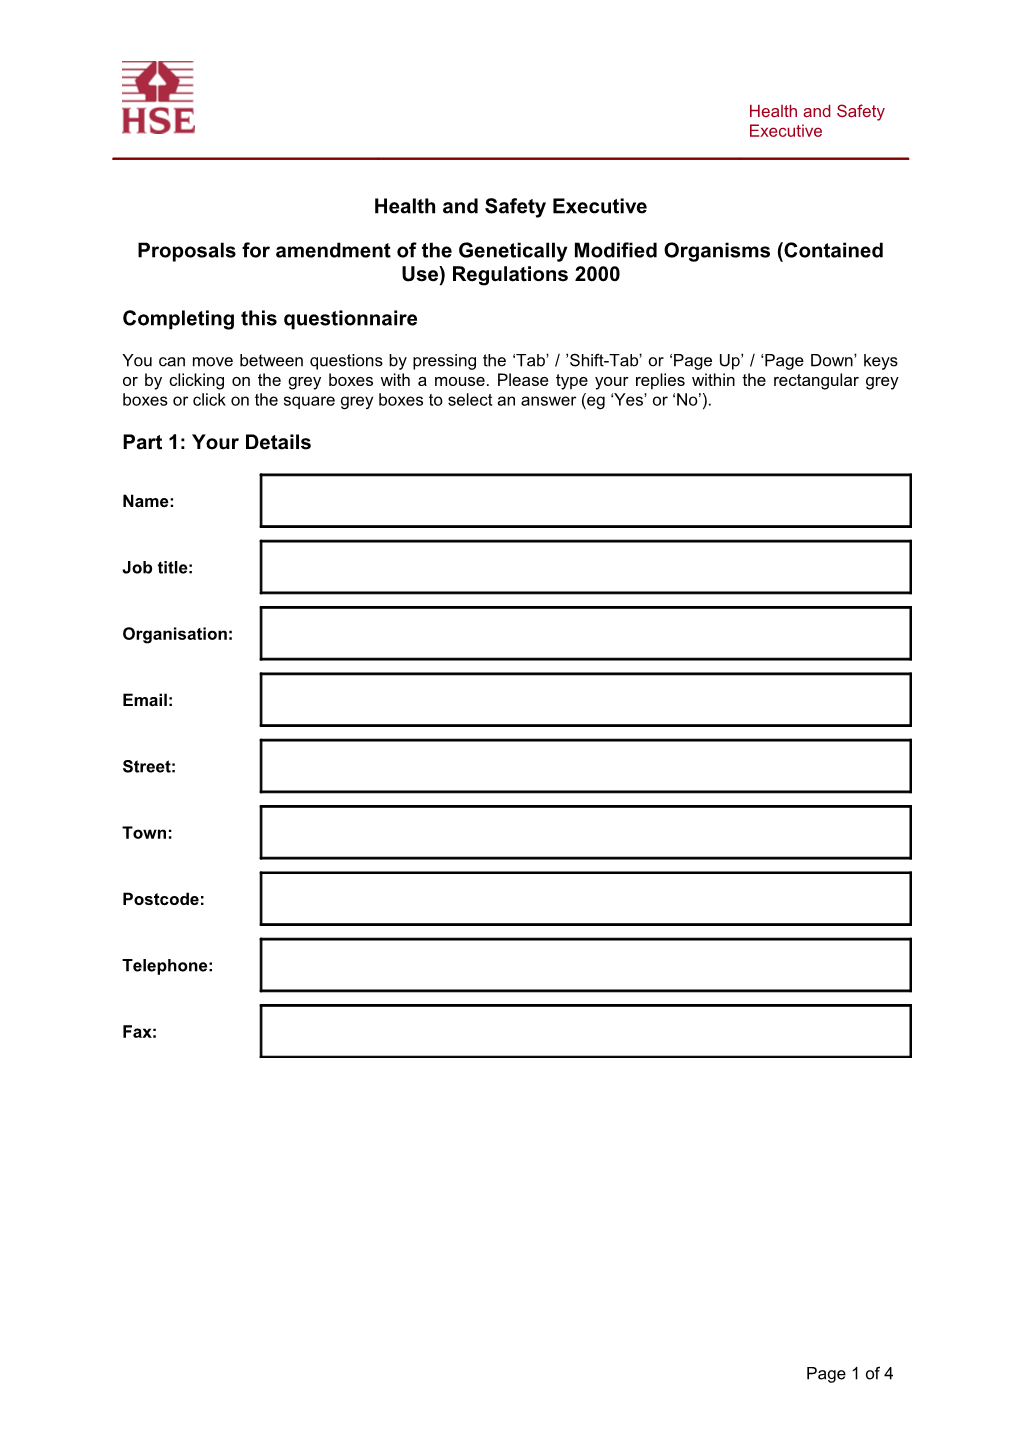 LPG Response Collection Template